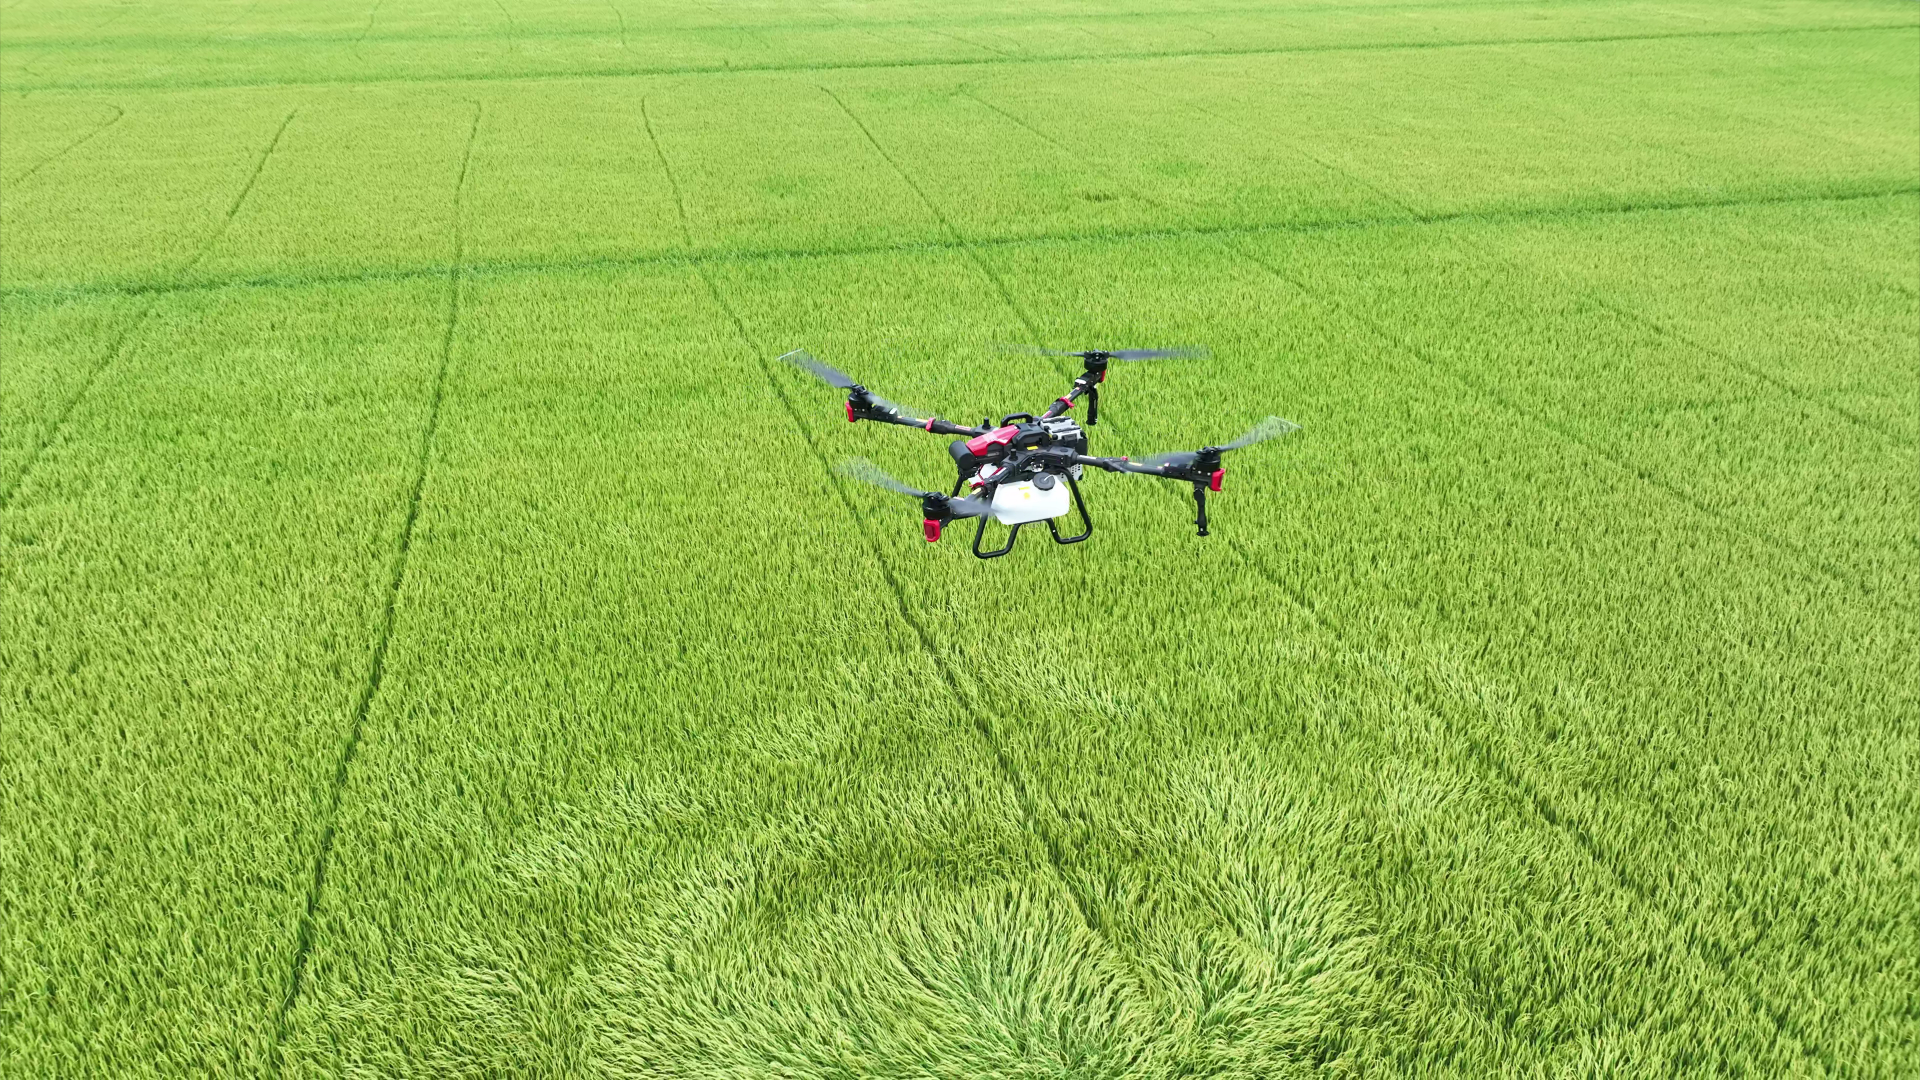 XAG P100 Pro Agricultural Drone flying over a rice field in Vietnam